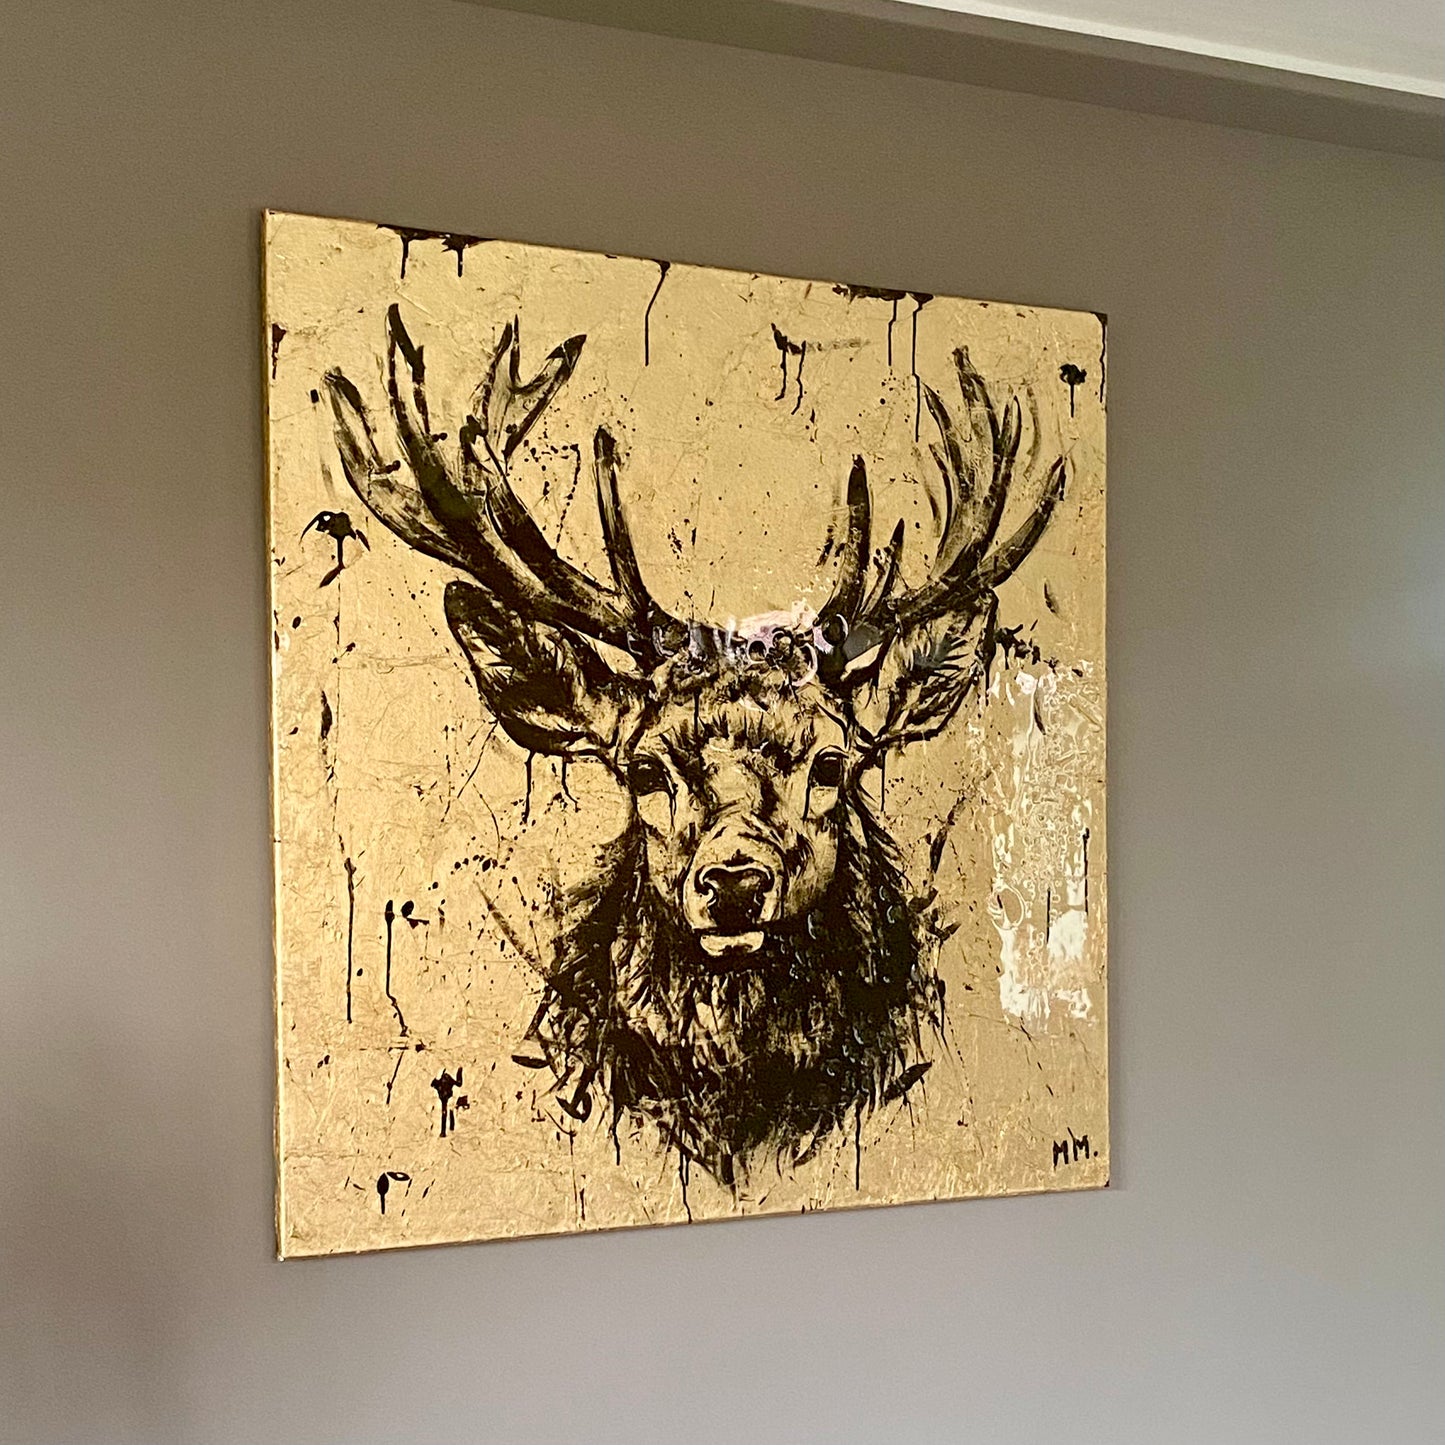 Large Original Handpainted Stag Deer Portrait On Canvas with Gold Leaf and Resin